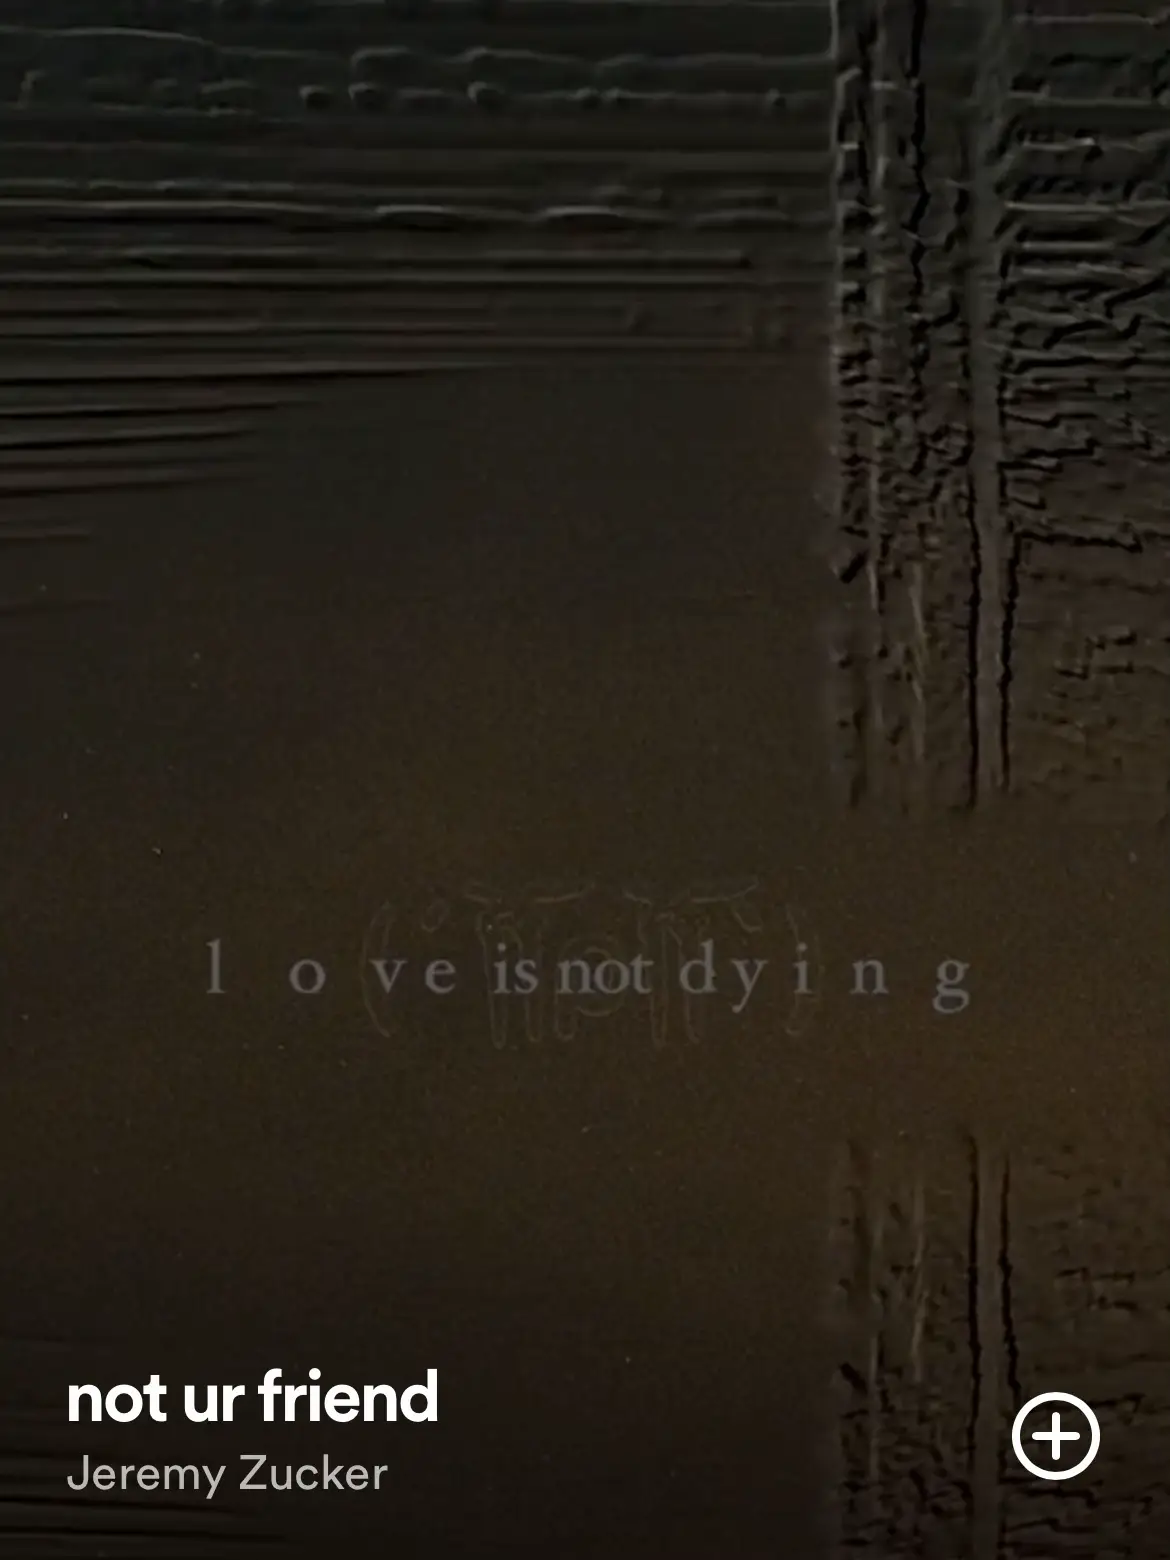  A white background with the words "love is not dying" written in black.